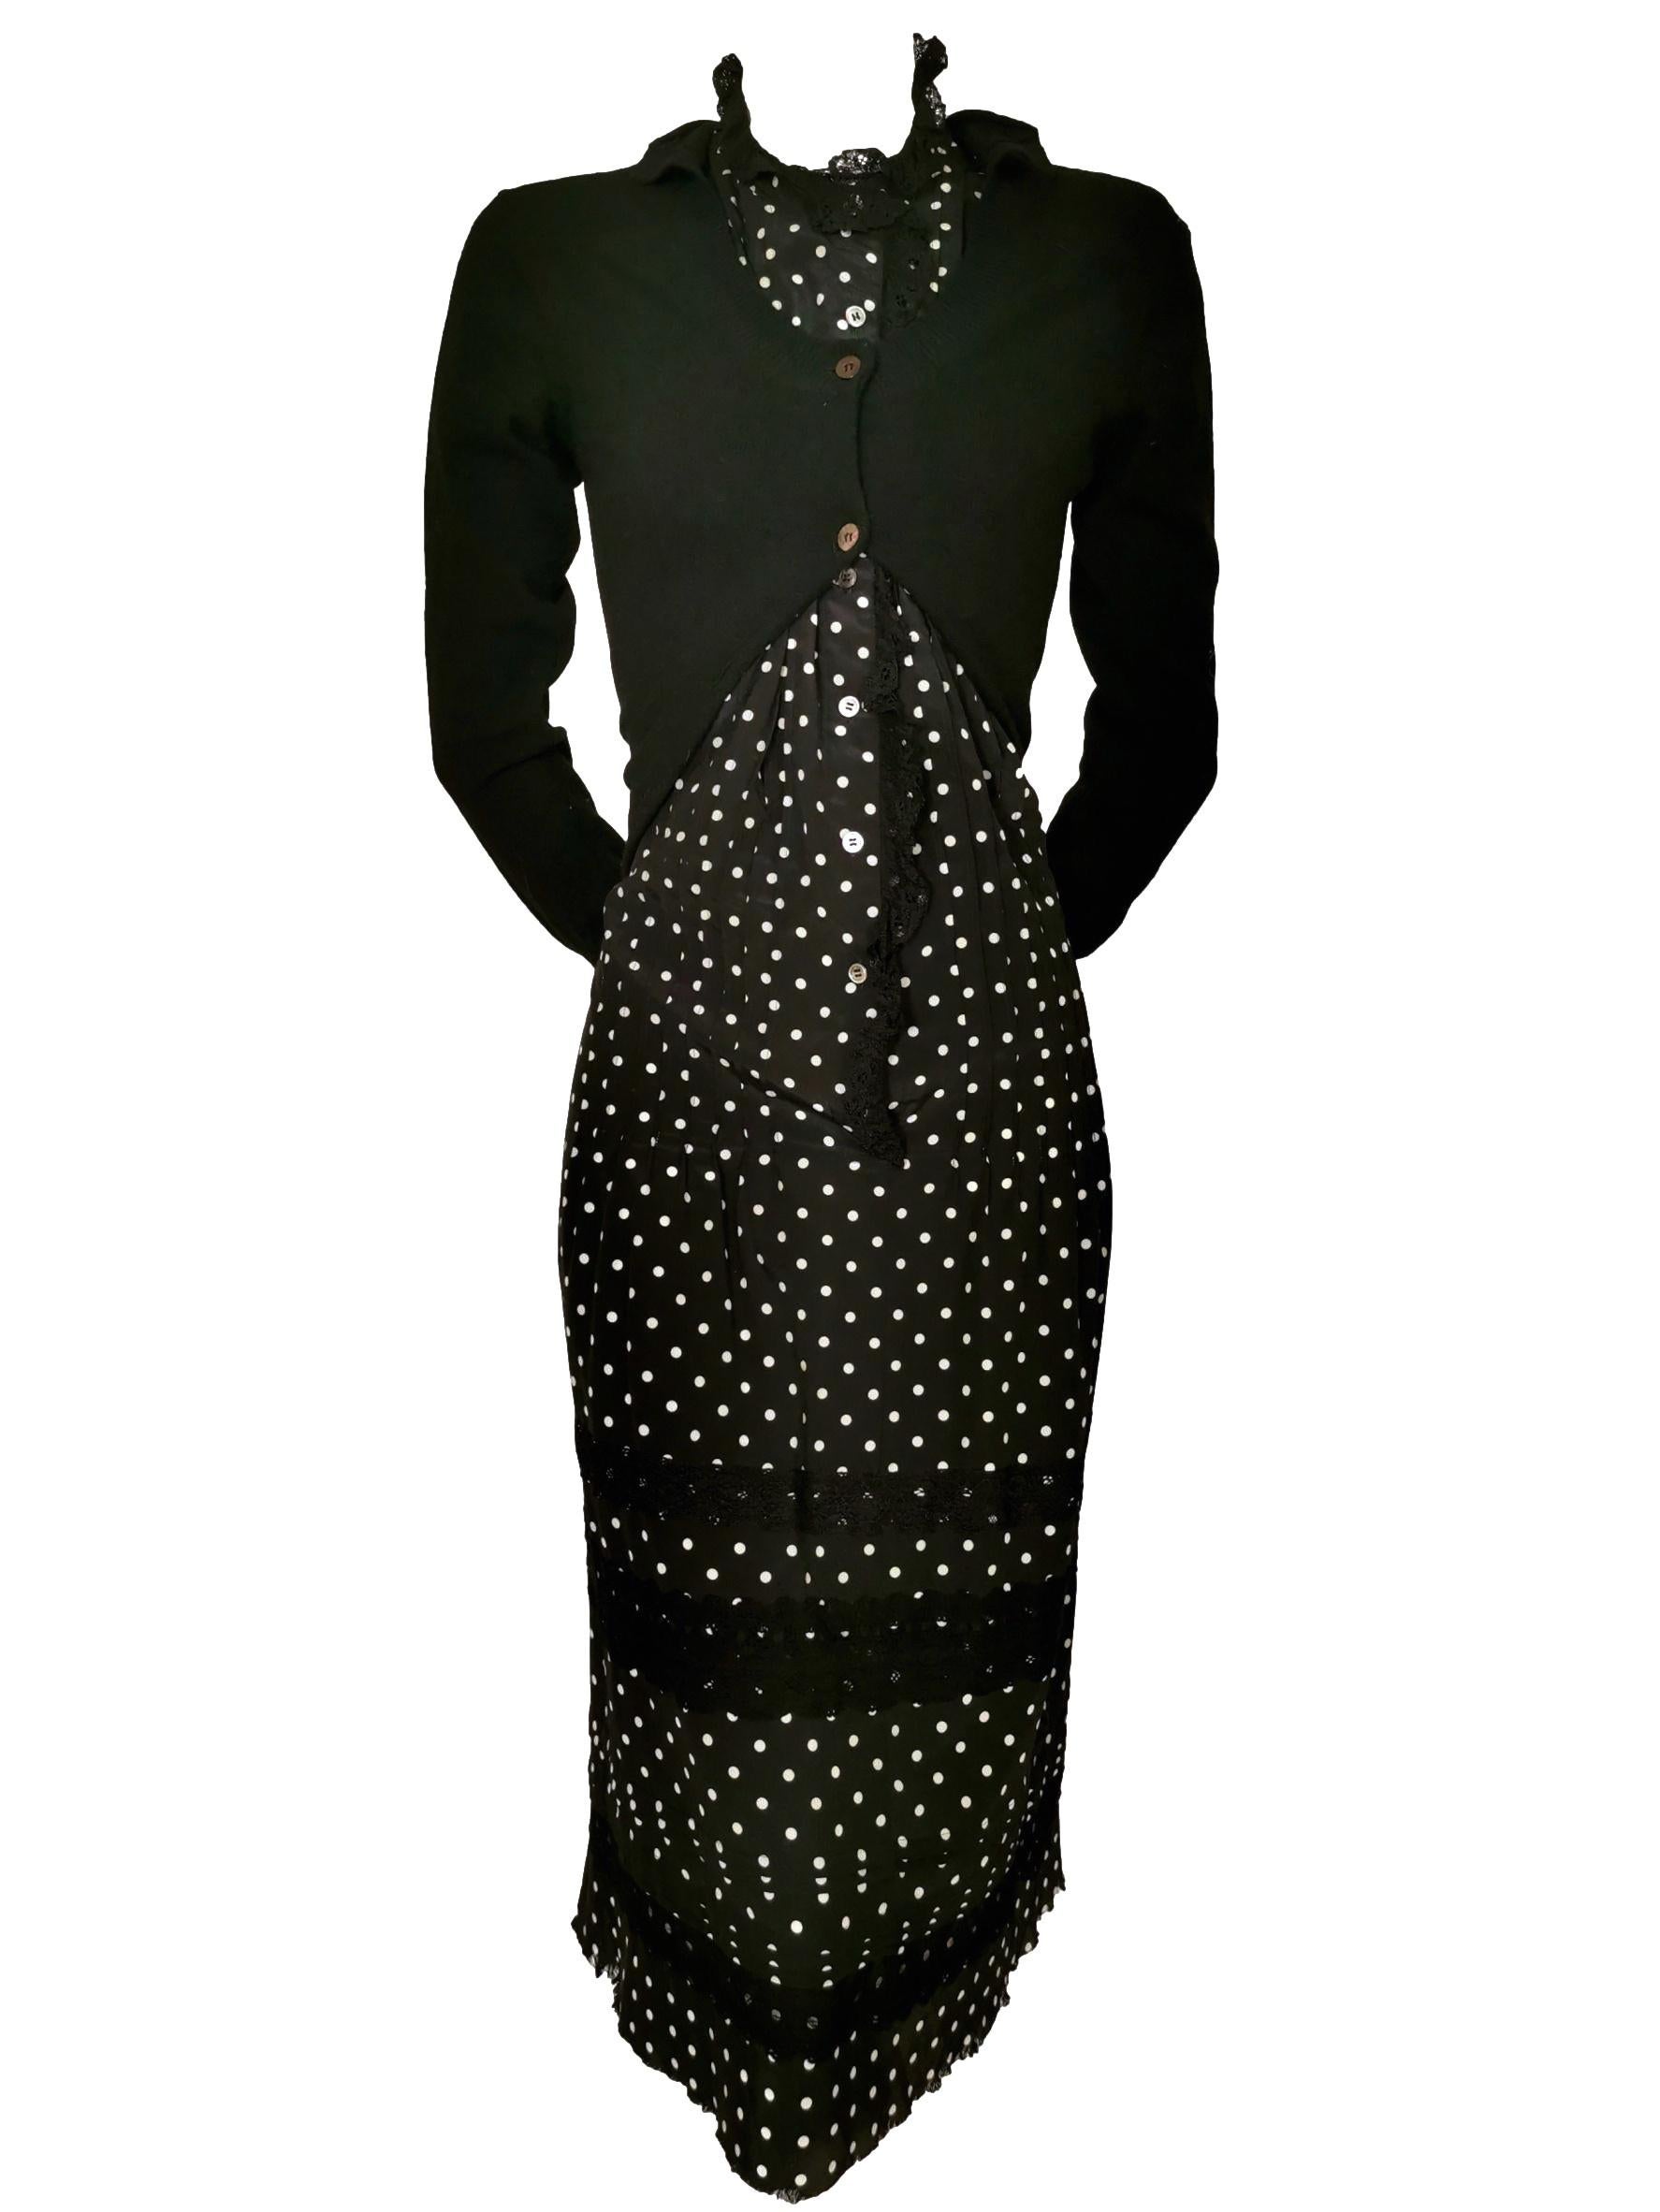 Junya Watanabe Comme des Garcons Twisted Polka Dot Cardigan Dress AD 2007 For Sale